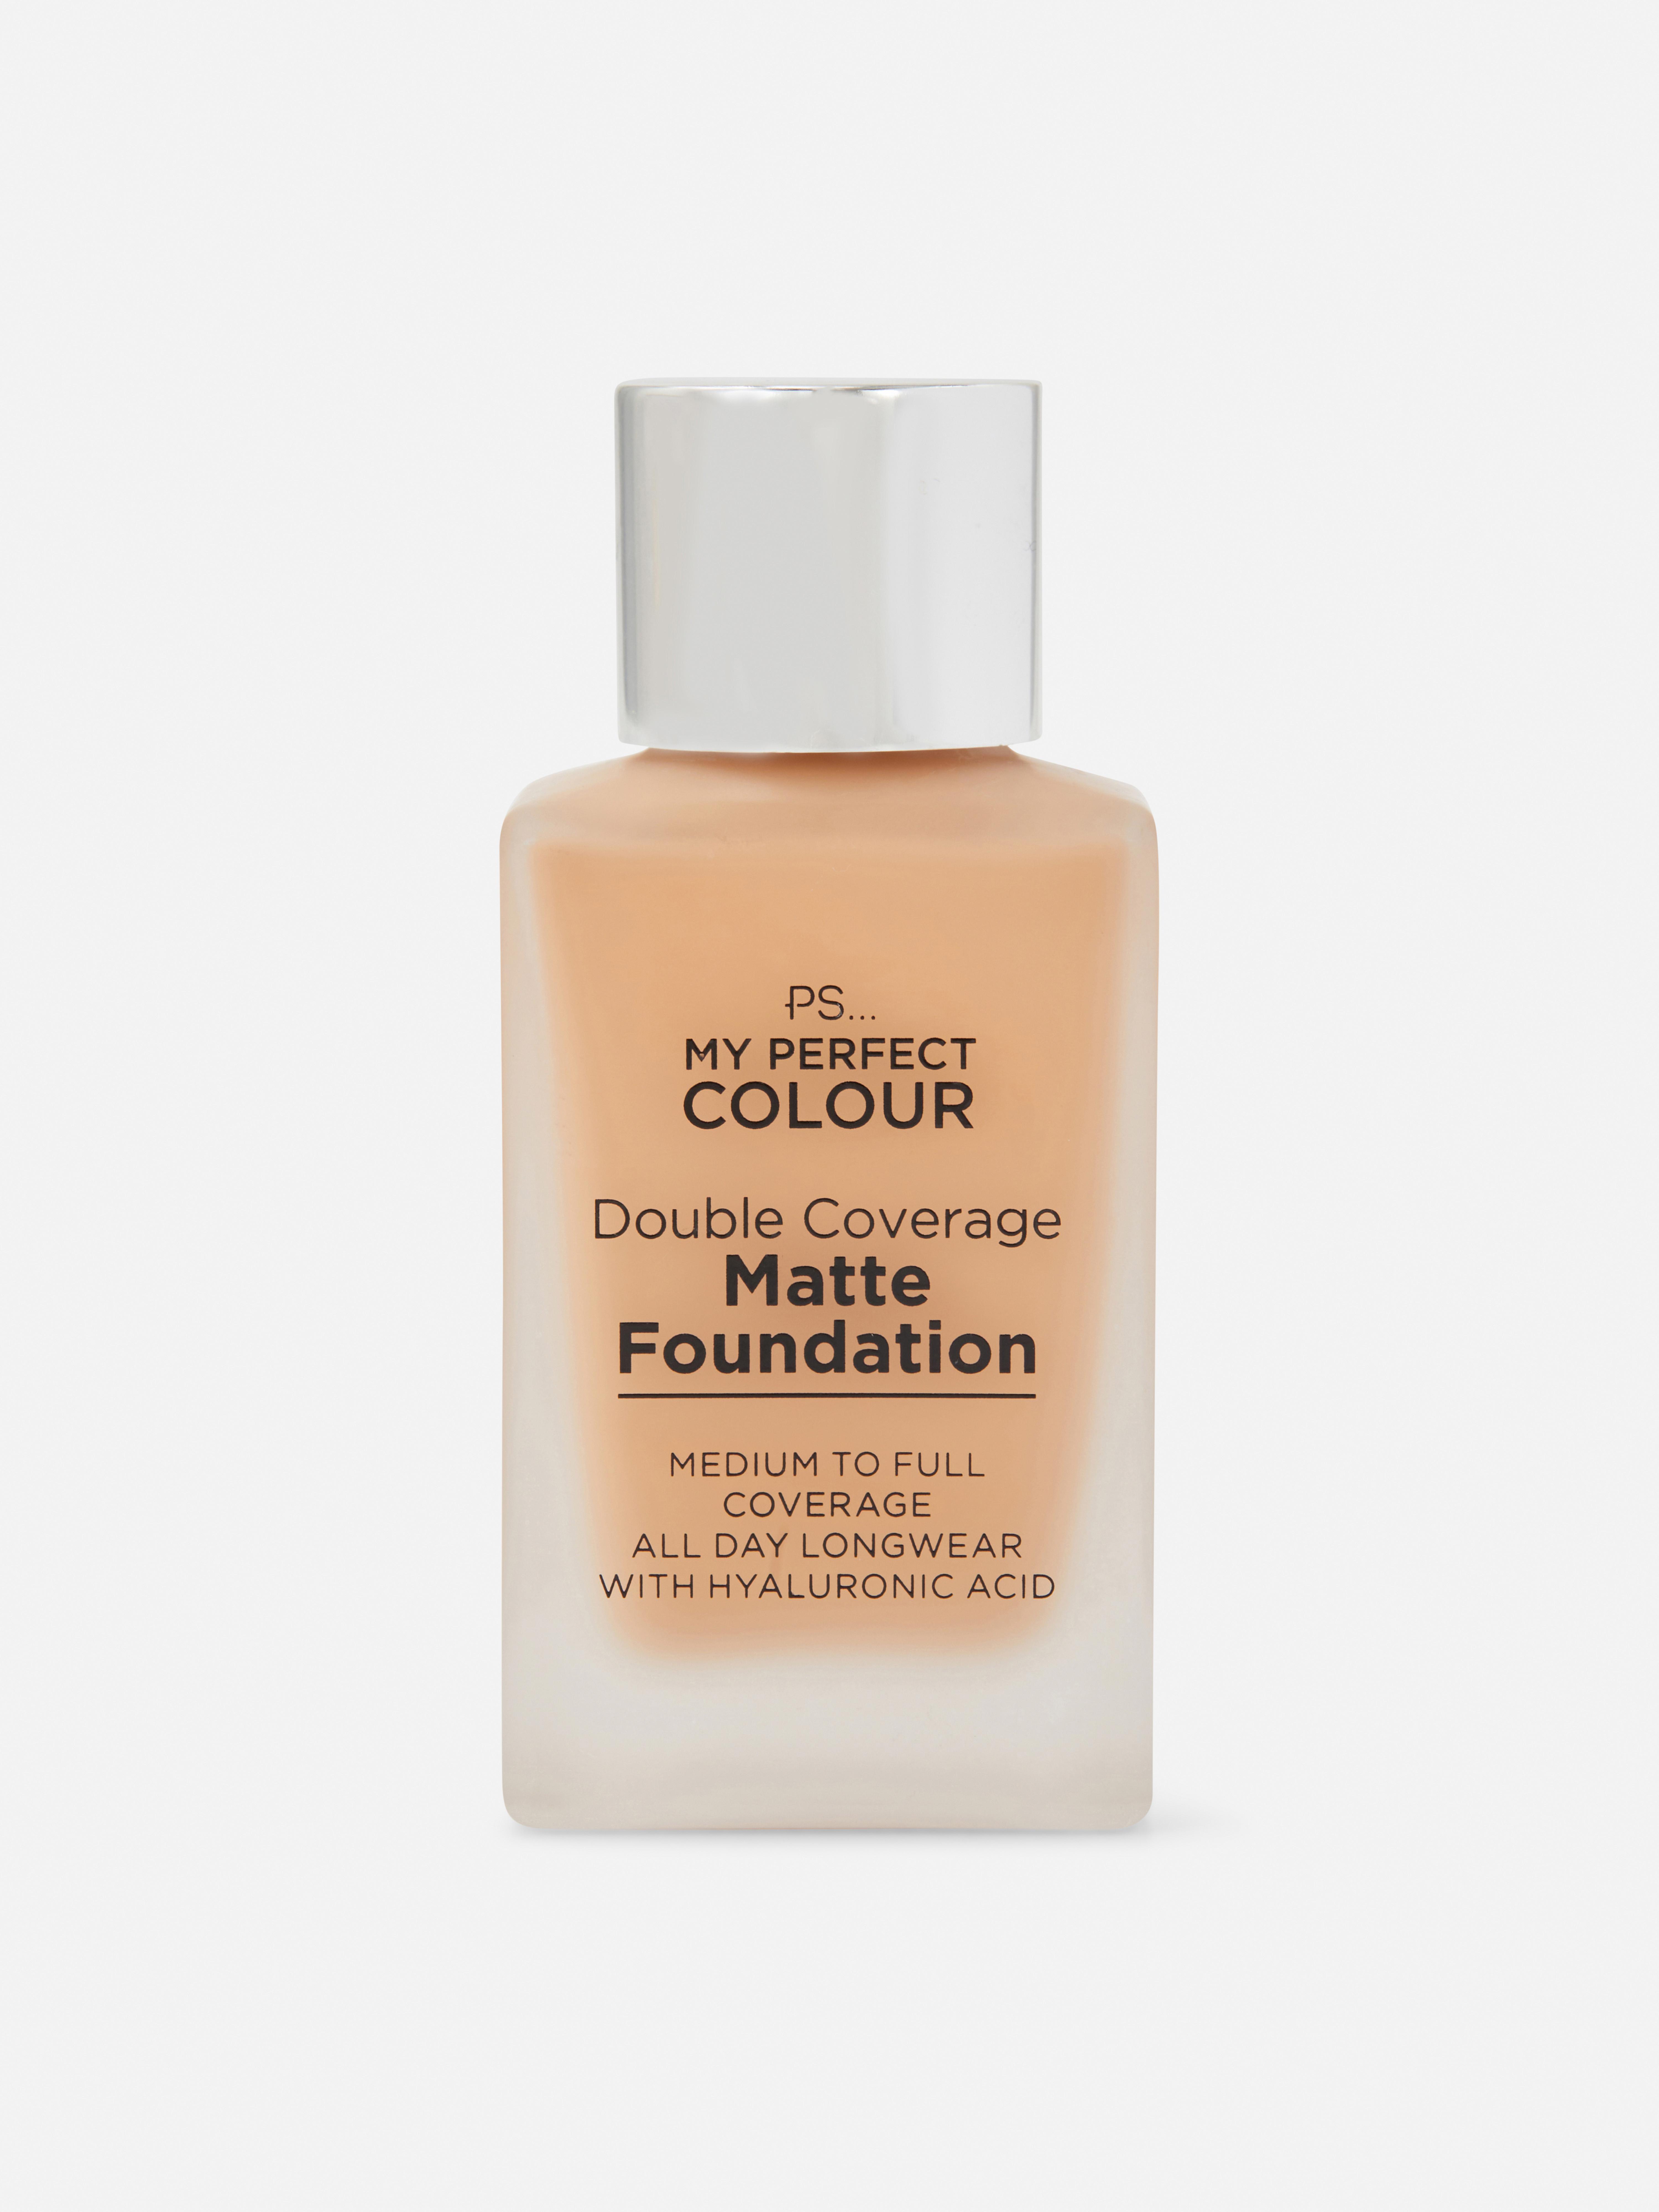 PS… My Perfect Colour Double Coverage Matte Foundation